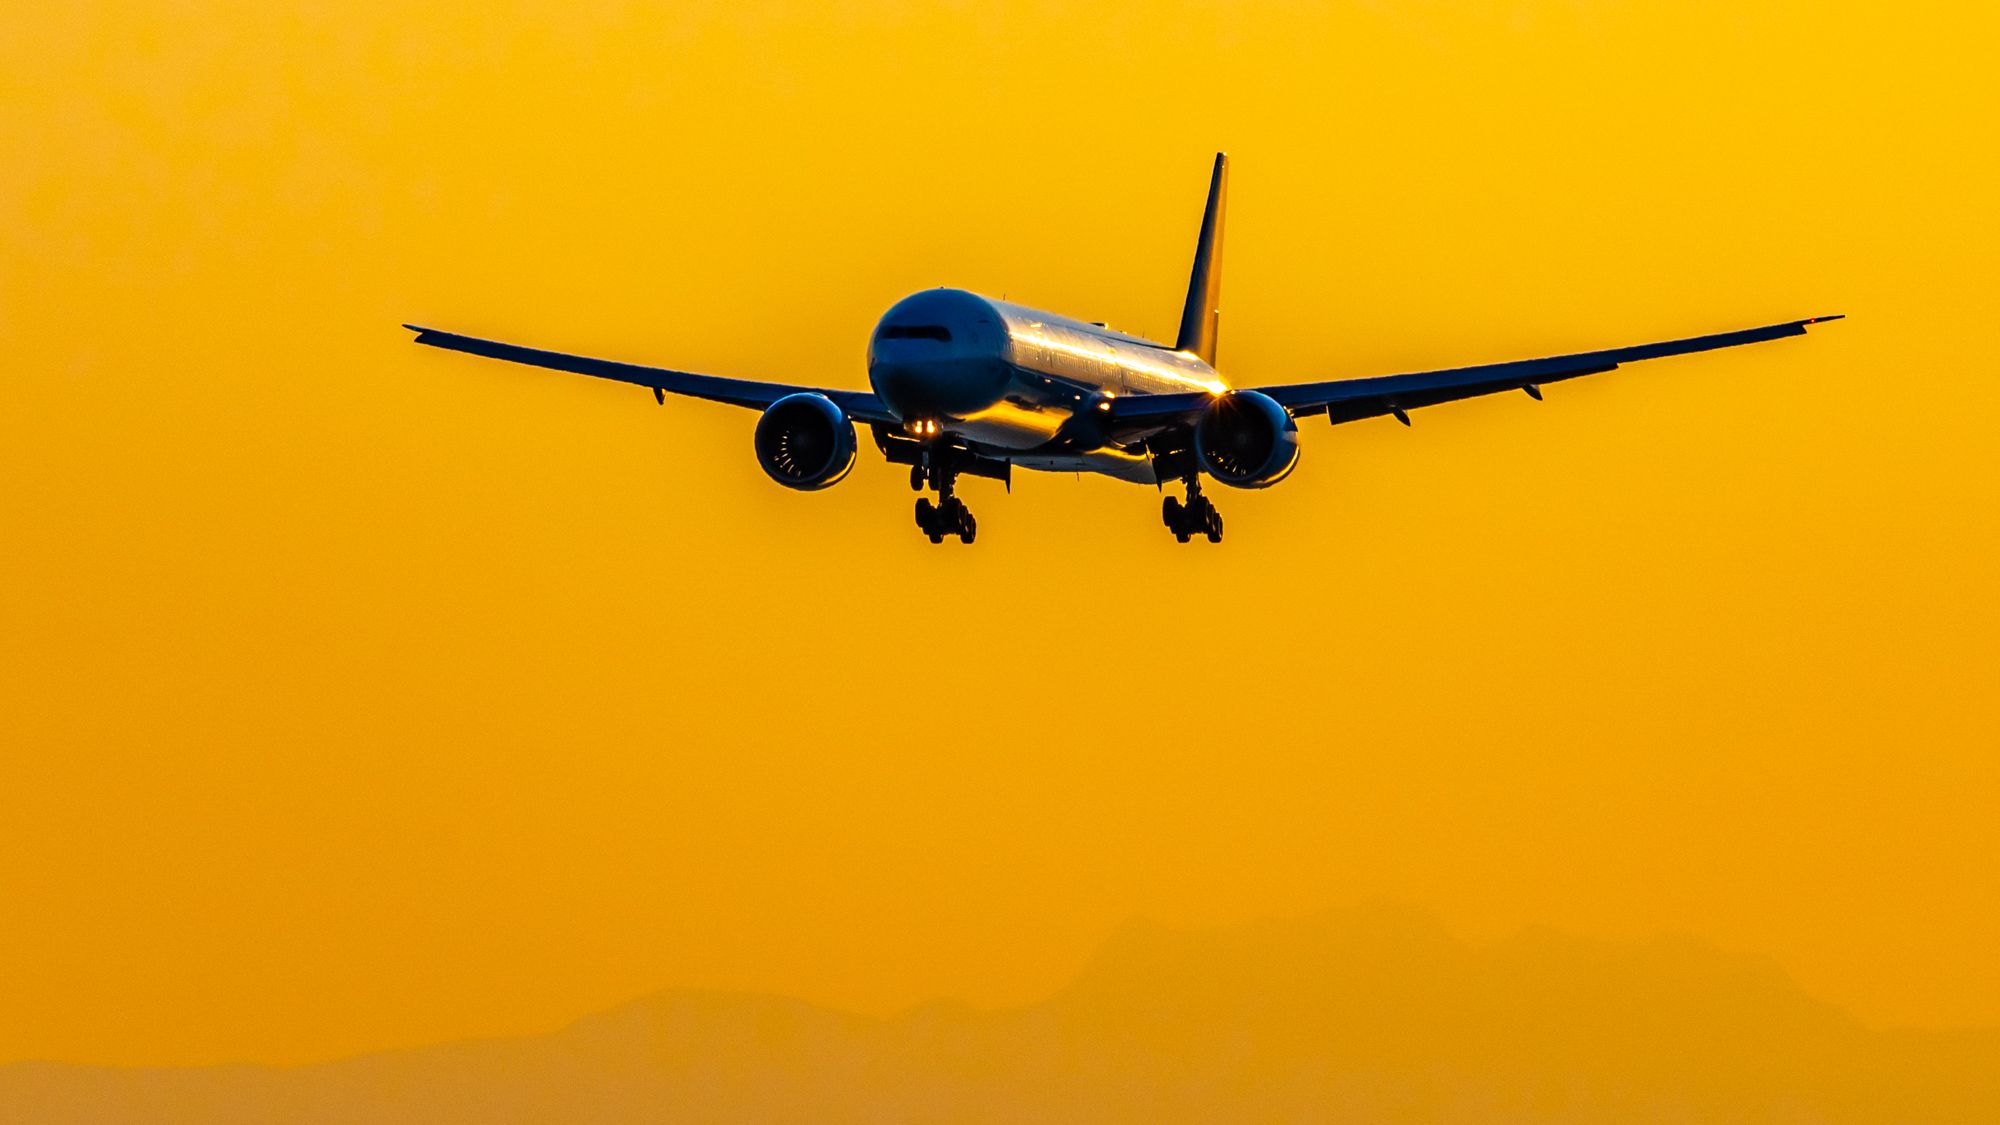 AIR CANADA 777 LANDING IN THE SUNSET